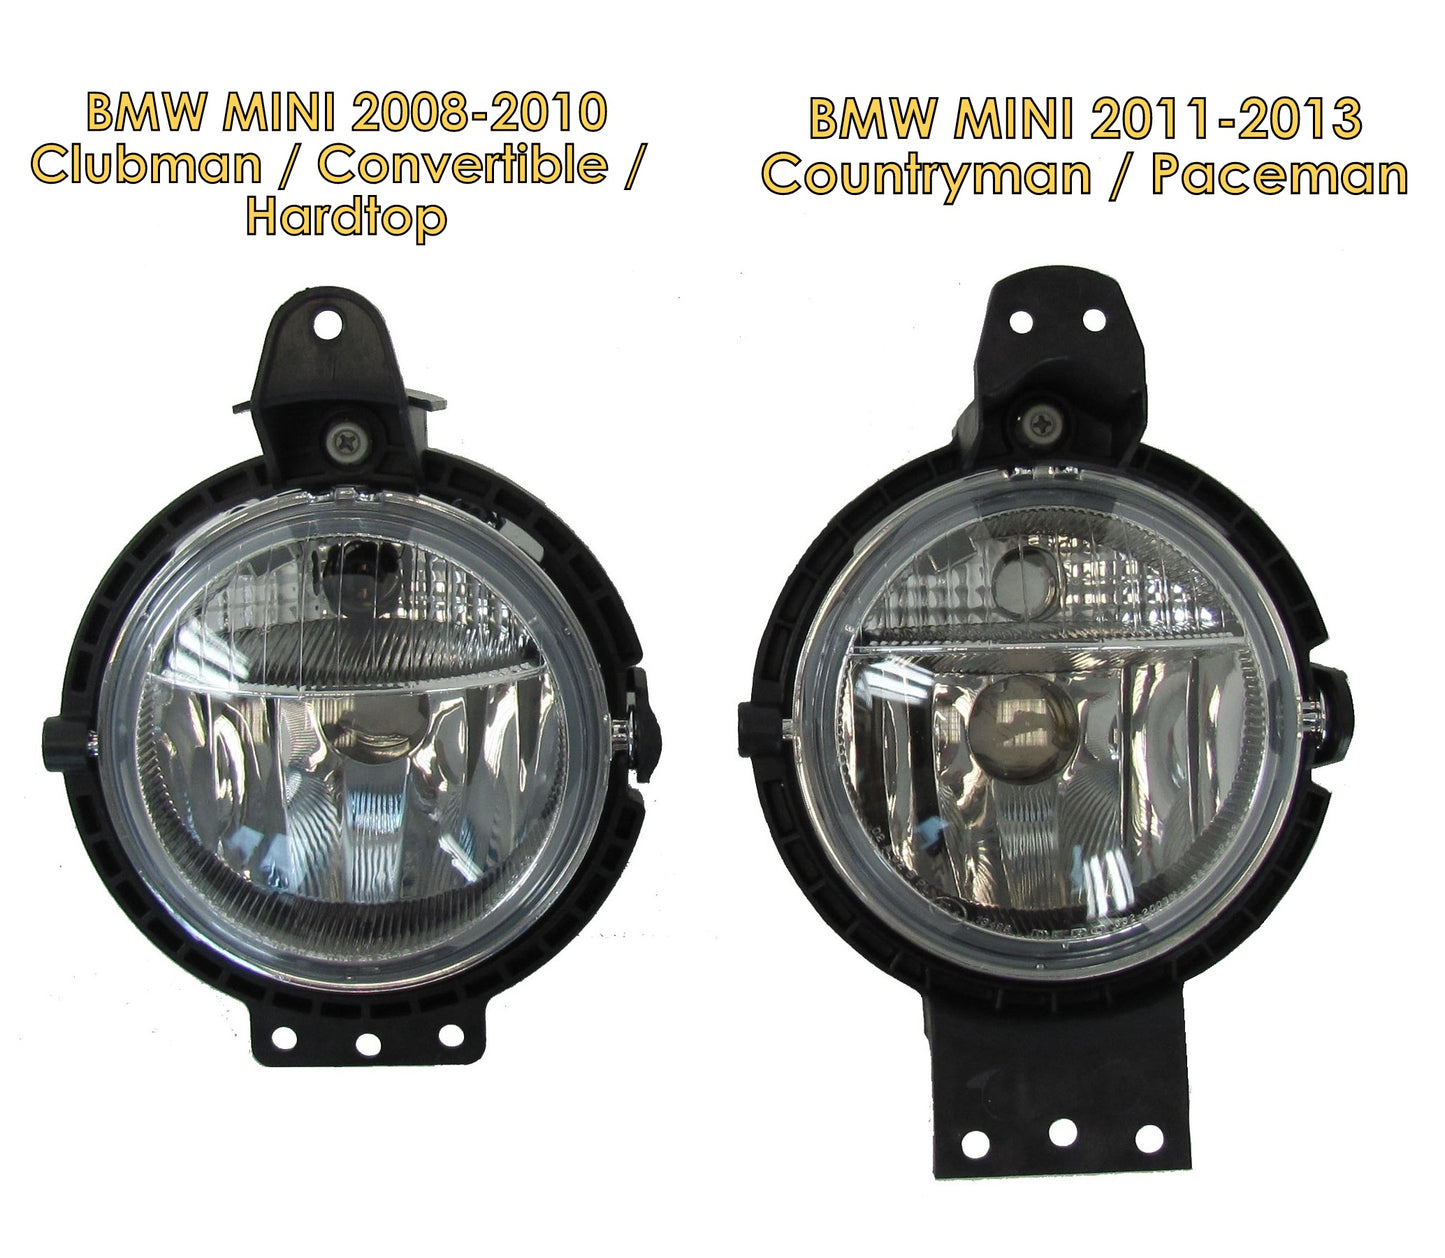 Front Bumper Fog+Side Light for BMW MINI R55,R56,R57,R58,R59 - Without bulbs - LH